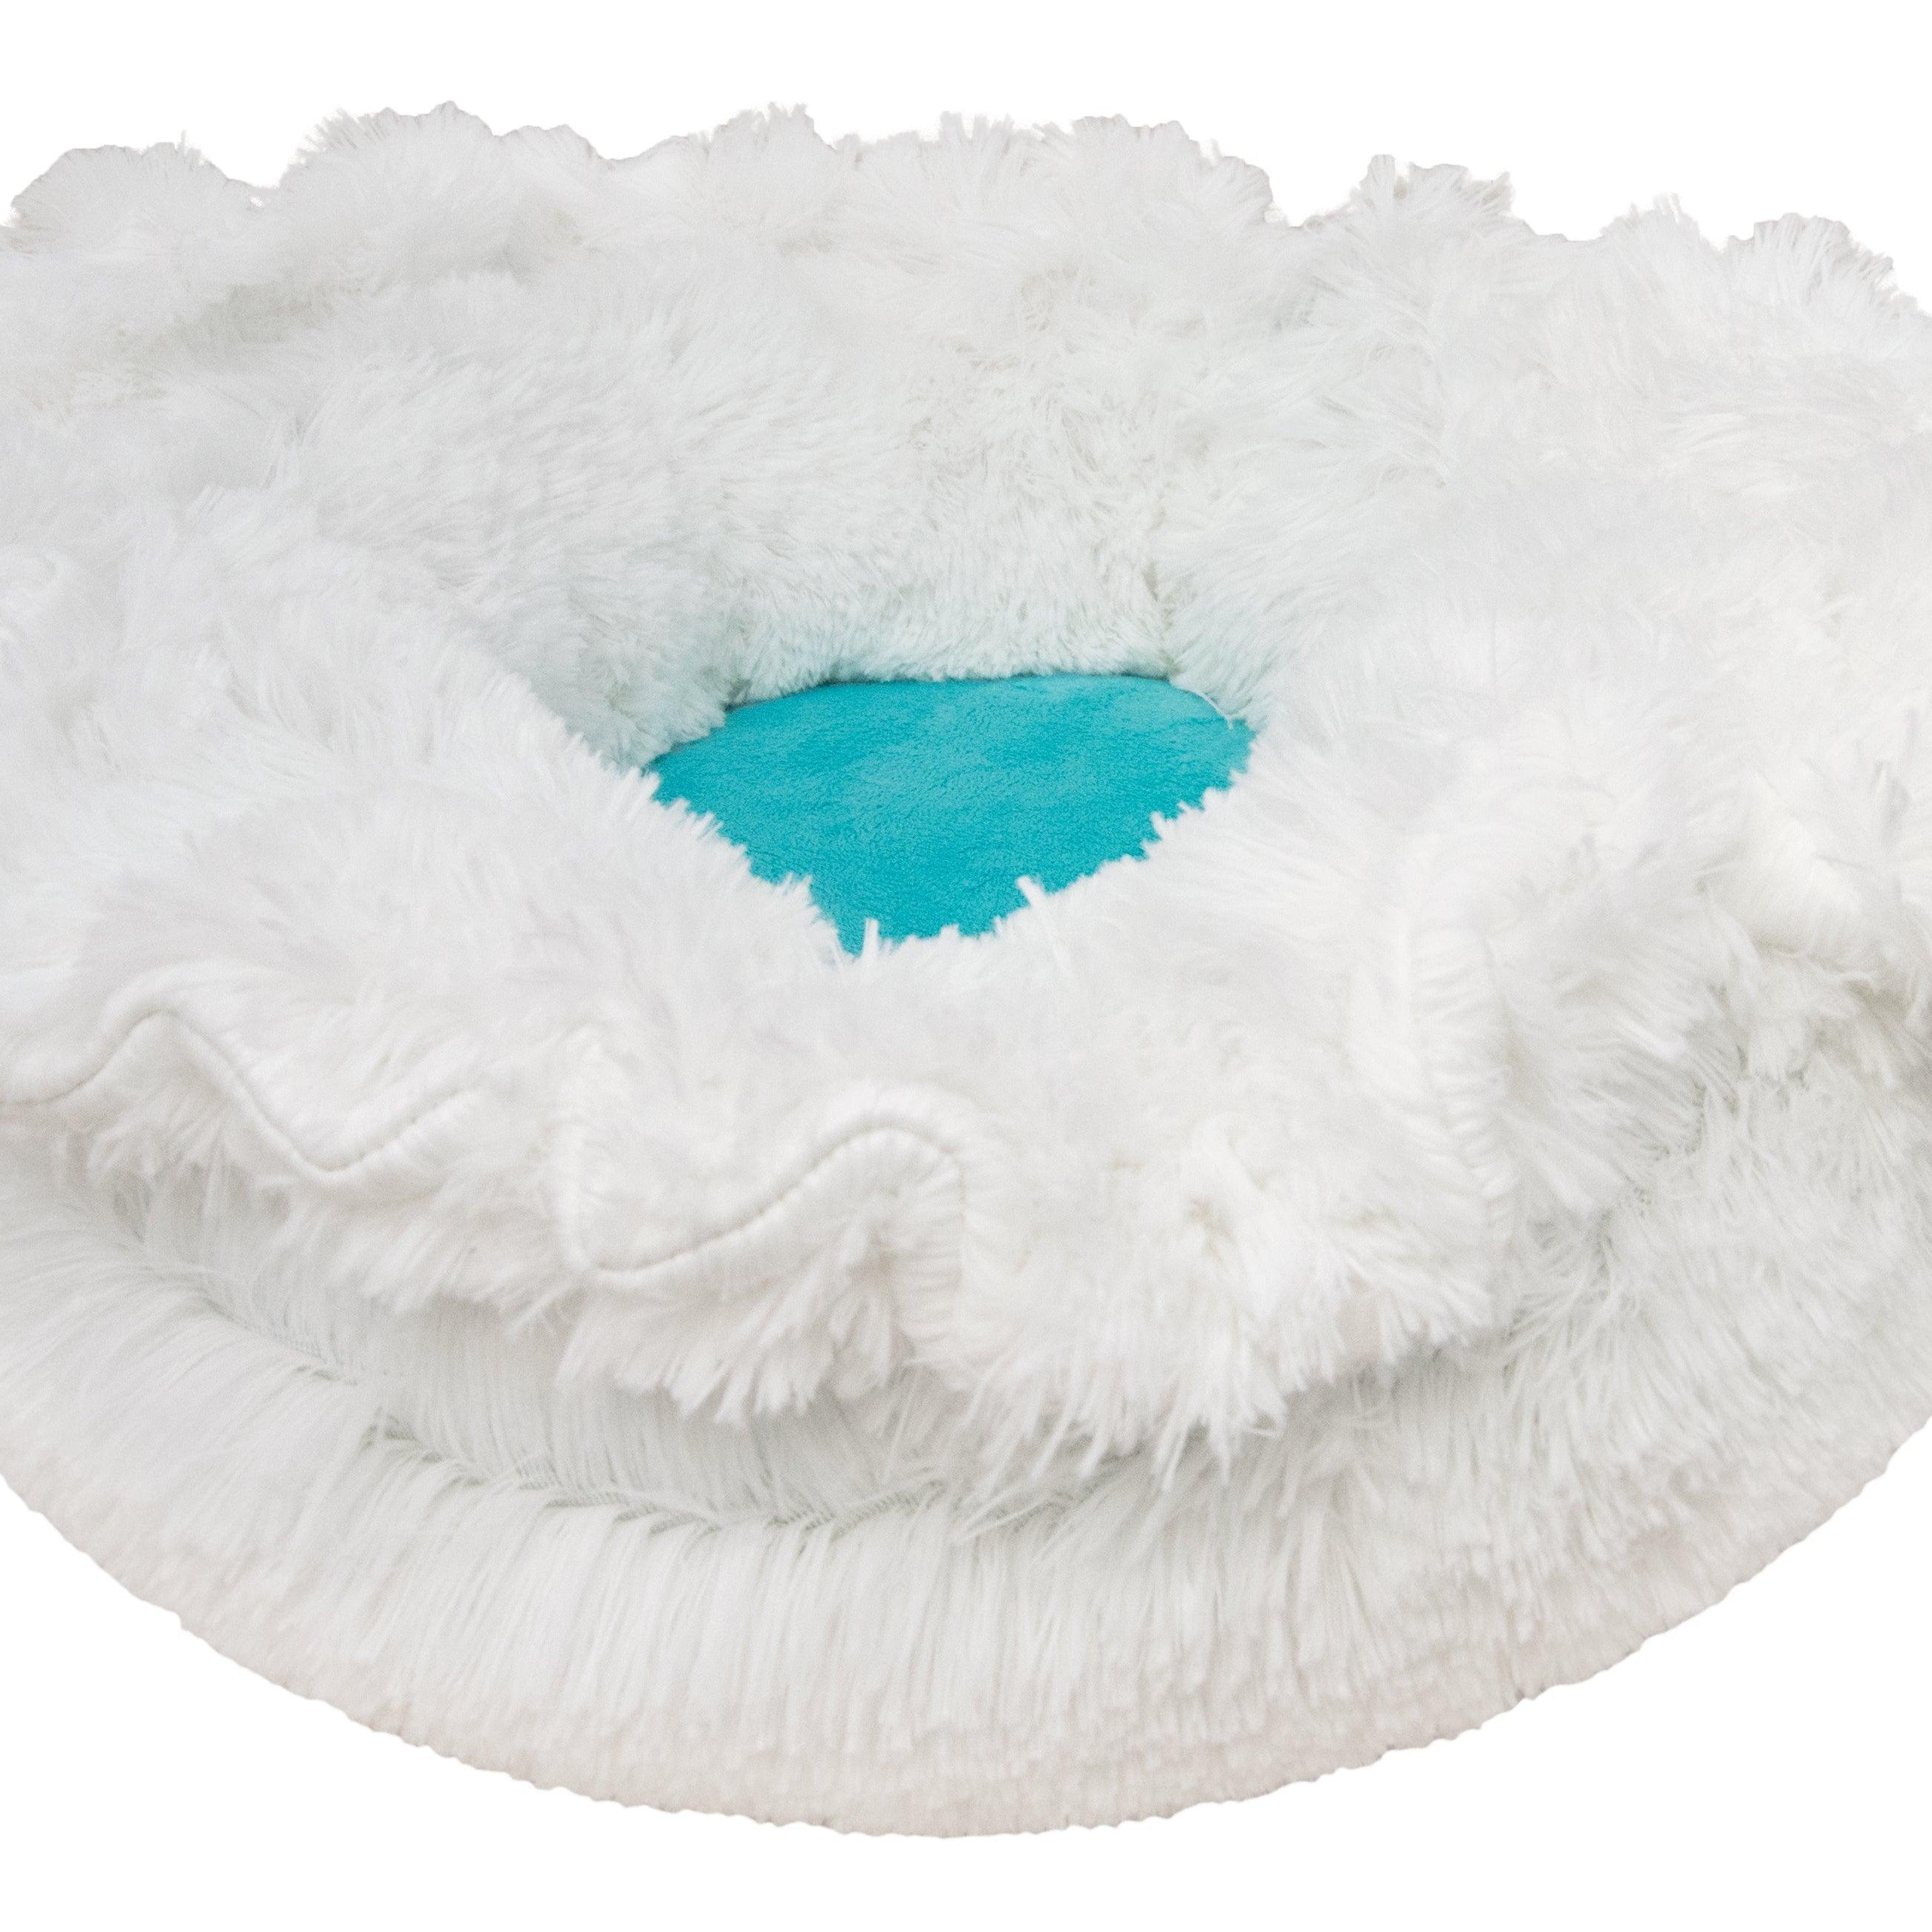 Lily Pod - Snow White and Aqua Marine Patch - Rocky & Maggie's Pet Boutique and Salon